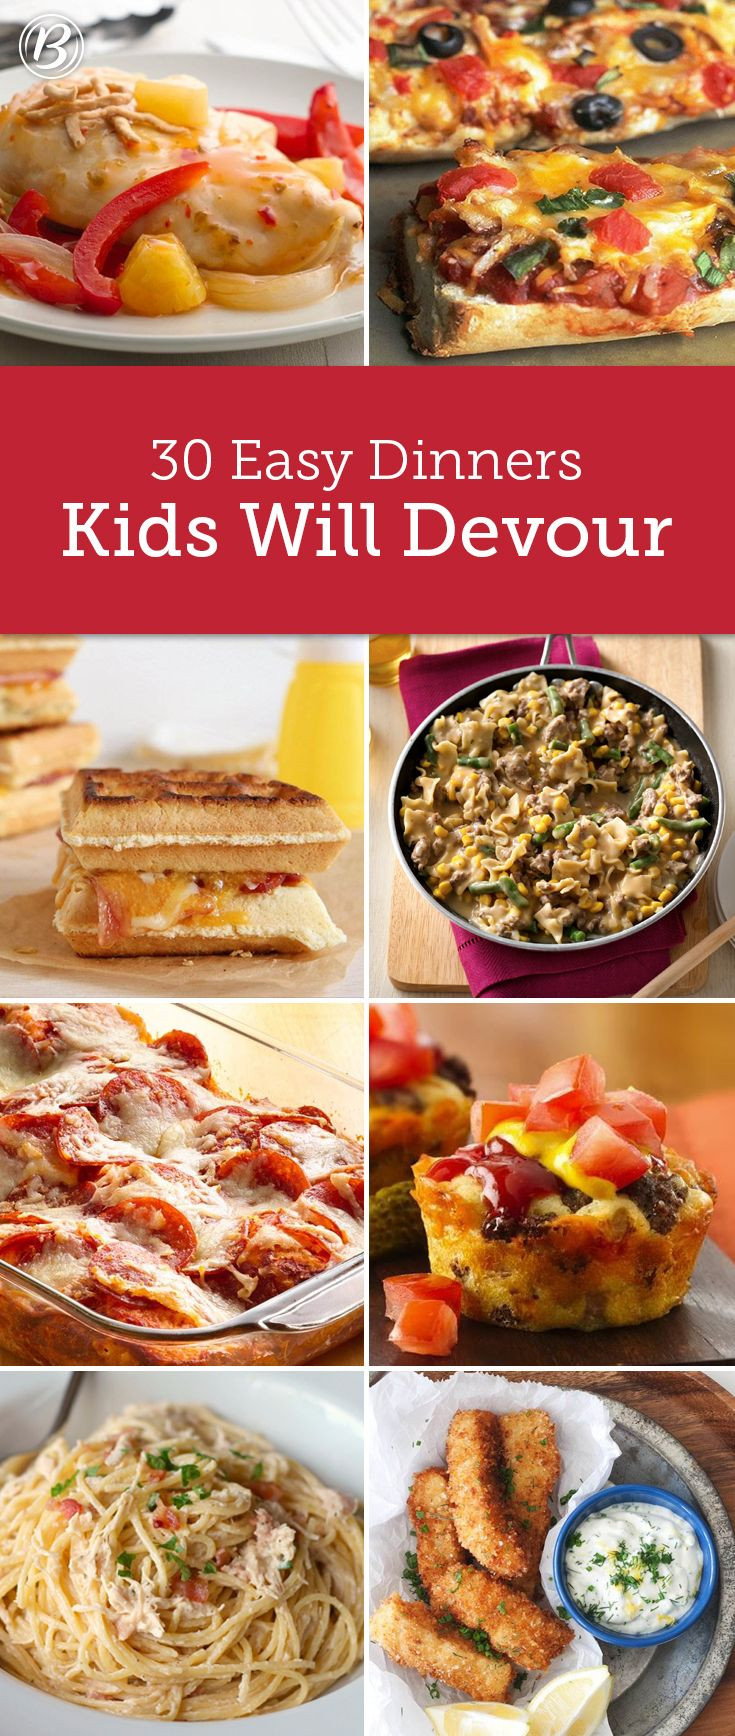 Kid Friendly Recipes For Dinner
 Kids’ Most Requested Dinners